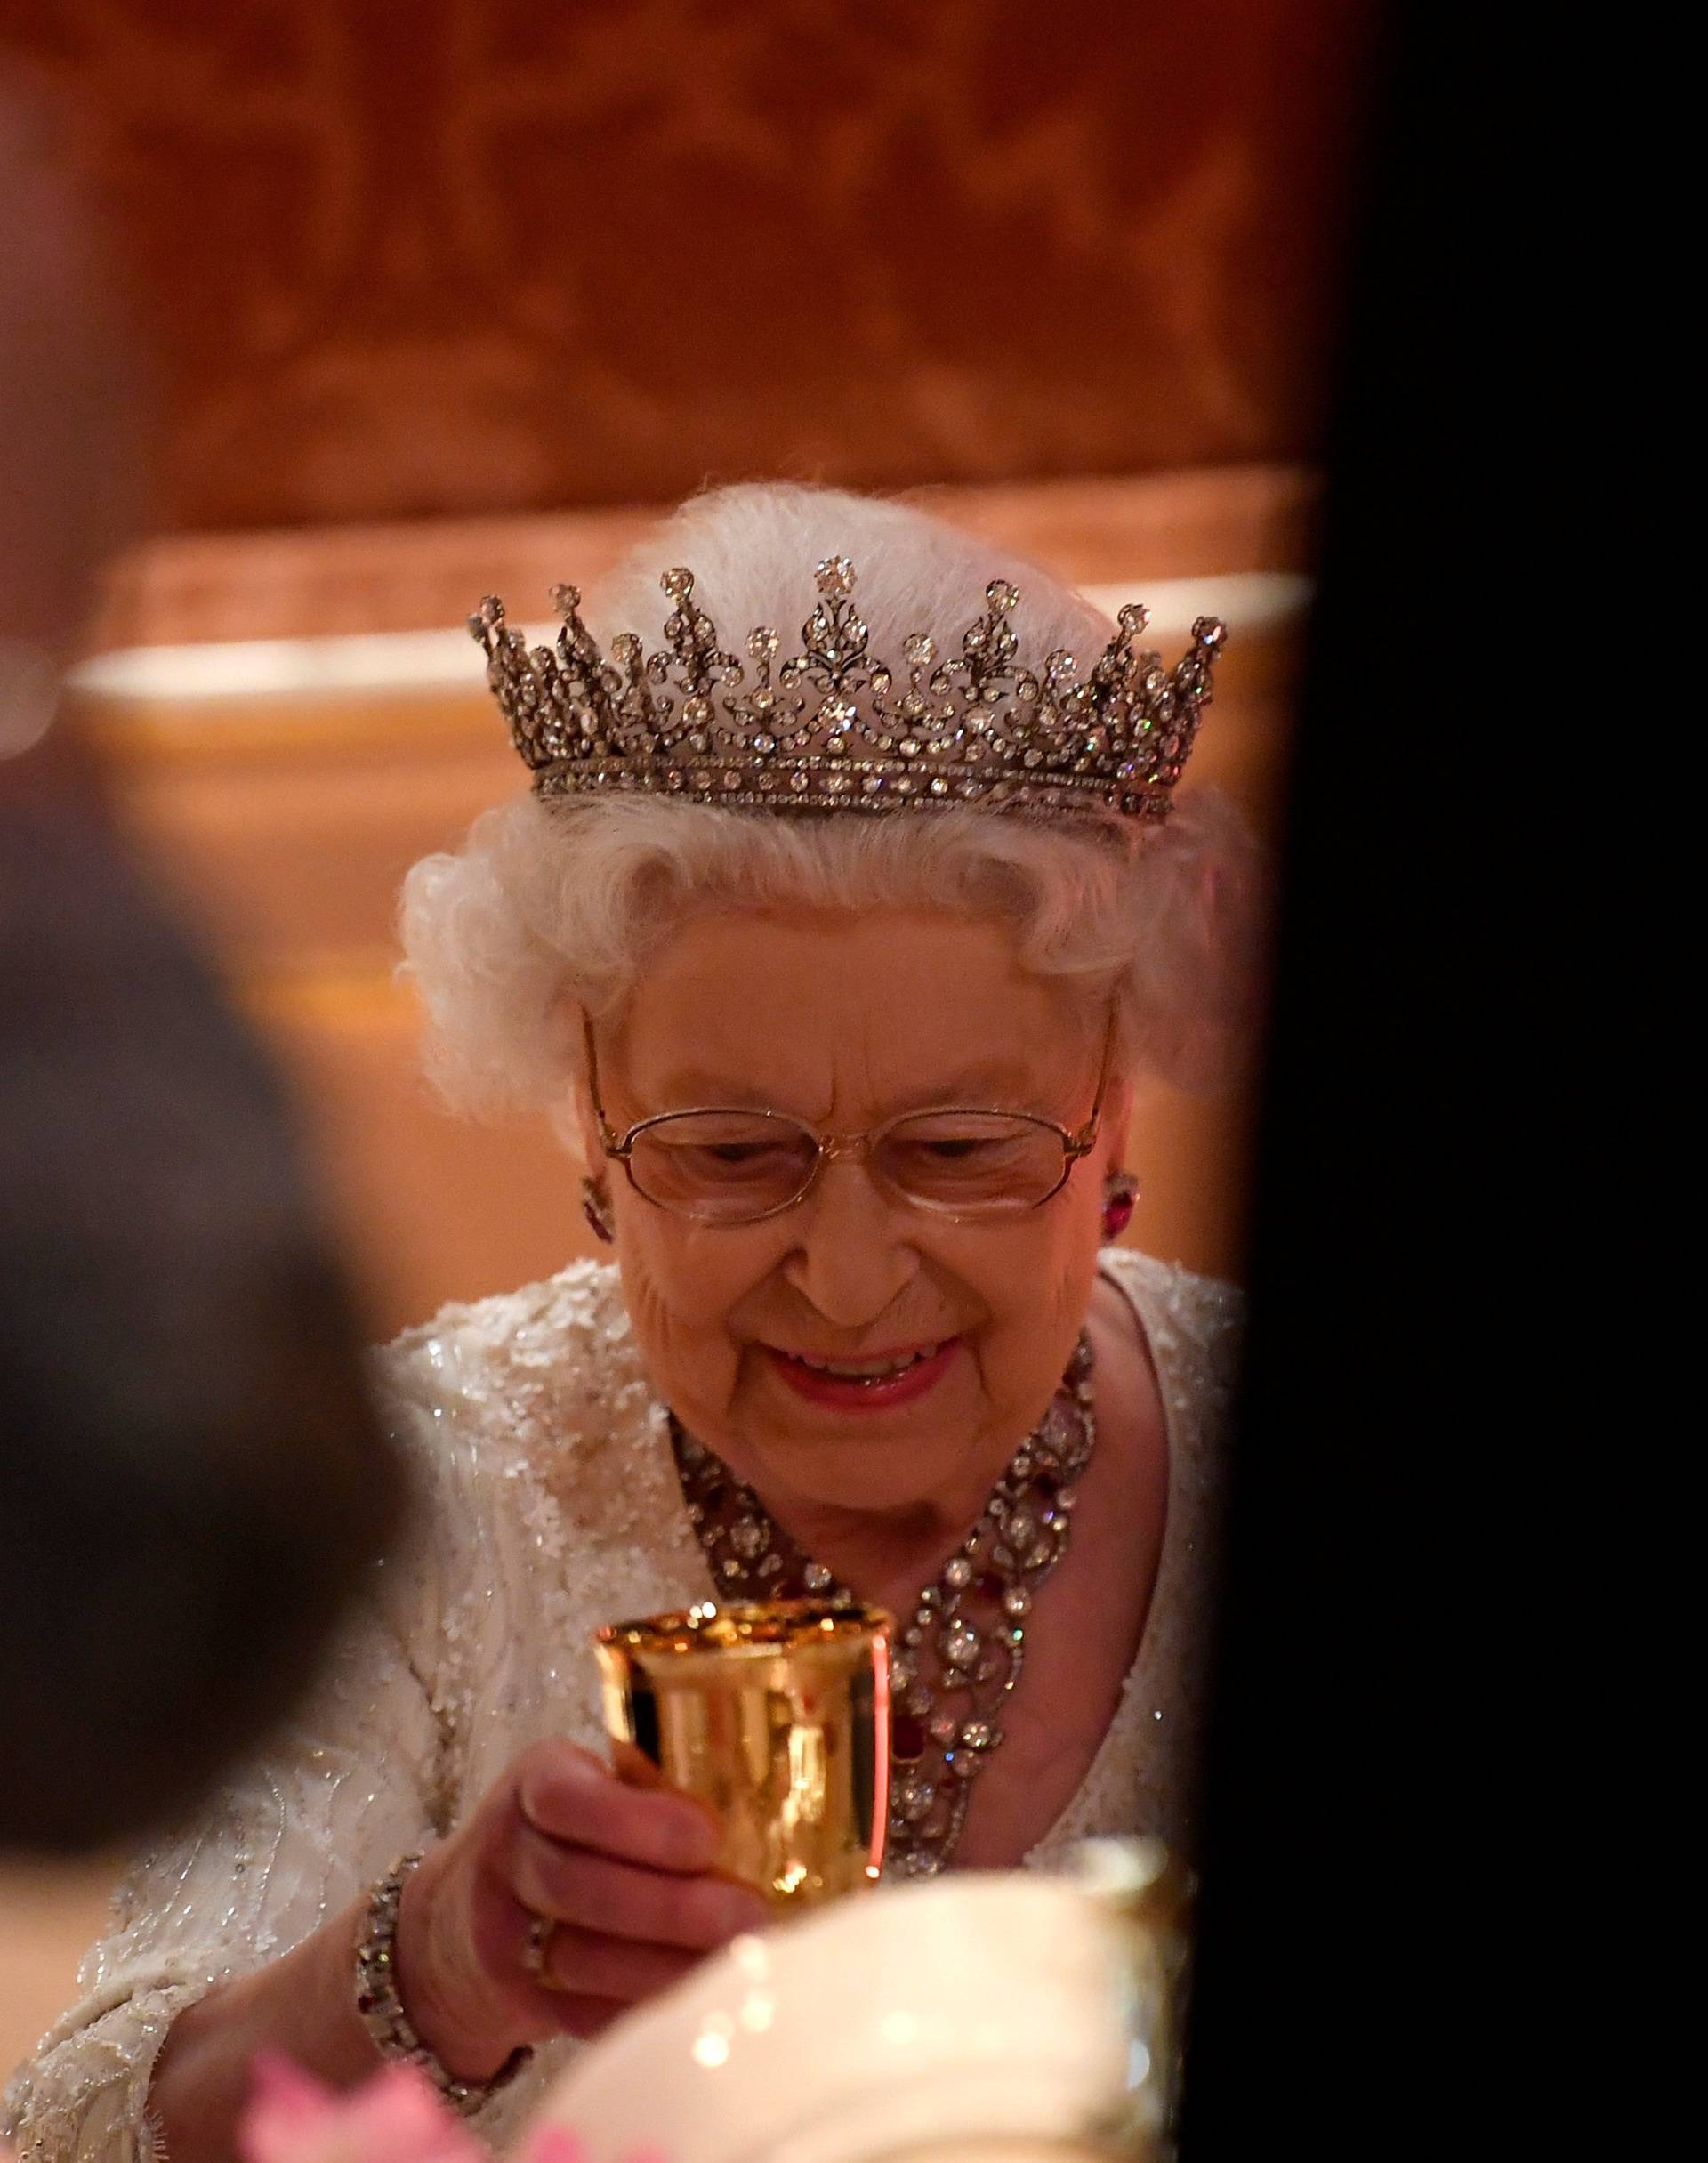 Britain's Queen Elizabeth raises her glass during speeches at The Queen's Dinner during the Commonwealth Heads of Government Meeting at Buckingham Palace in London, Britain